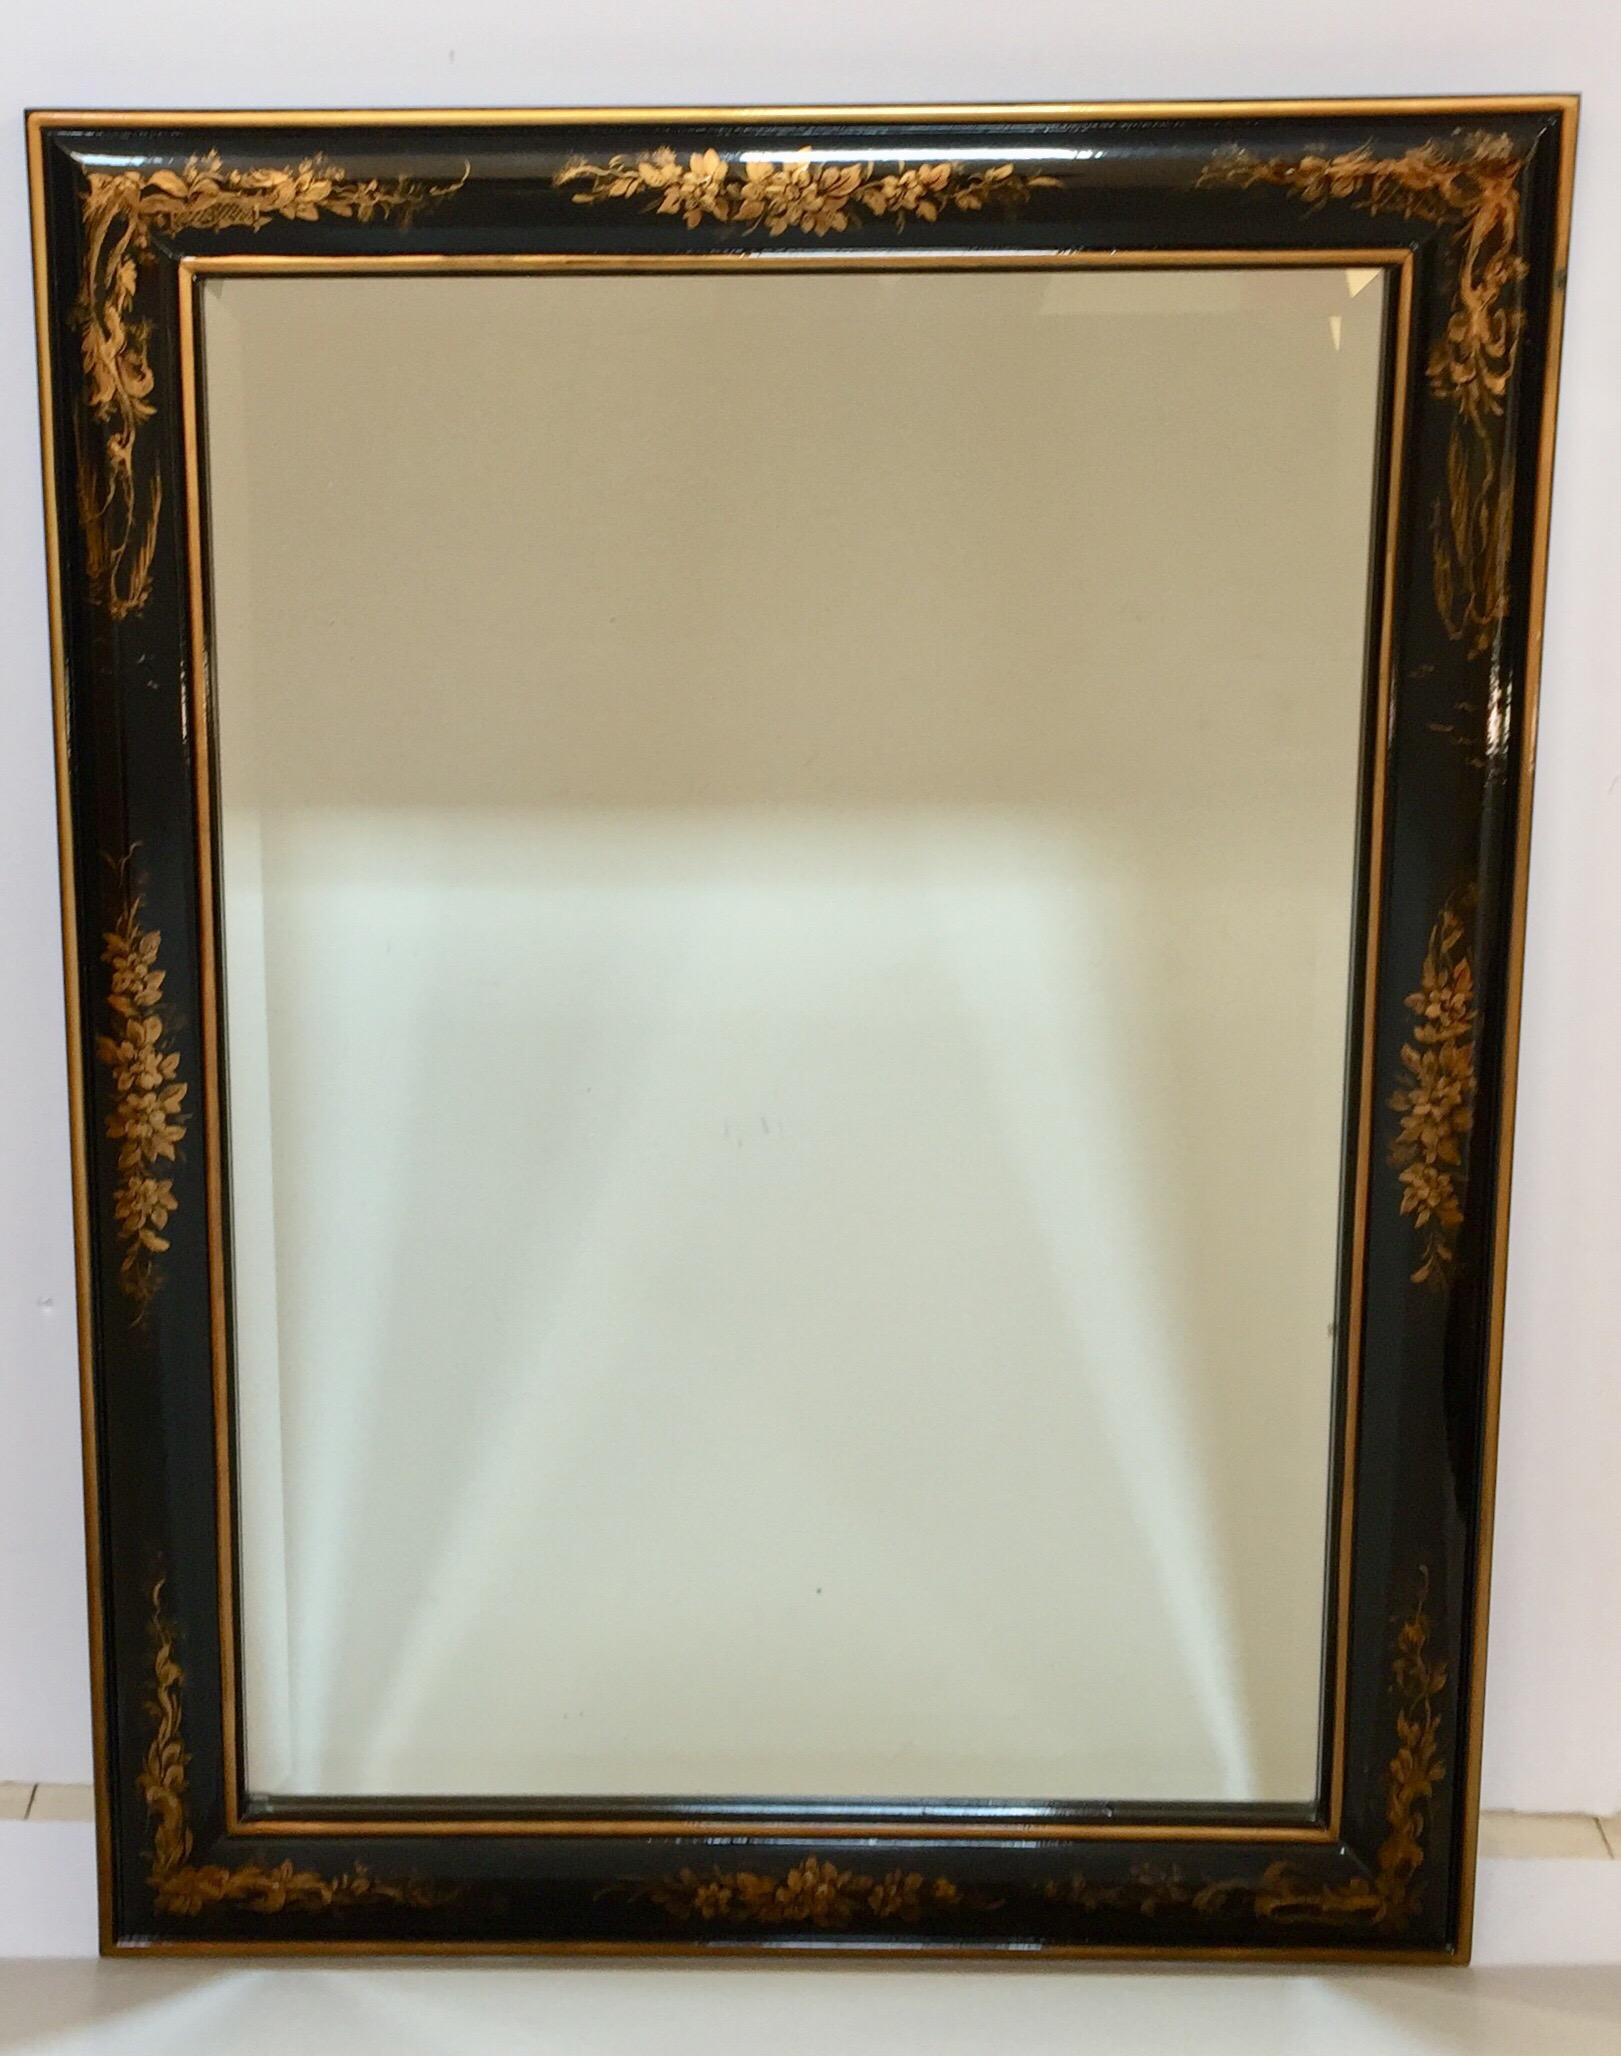 20th Century Chinoiserie Black and Gold Framed Rectangular Wall Mirror